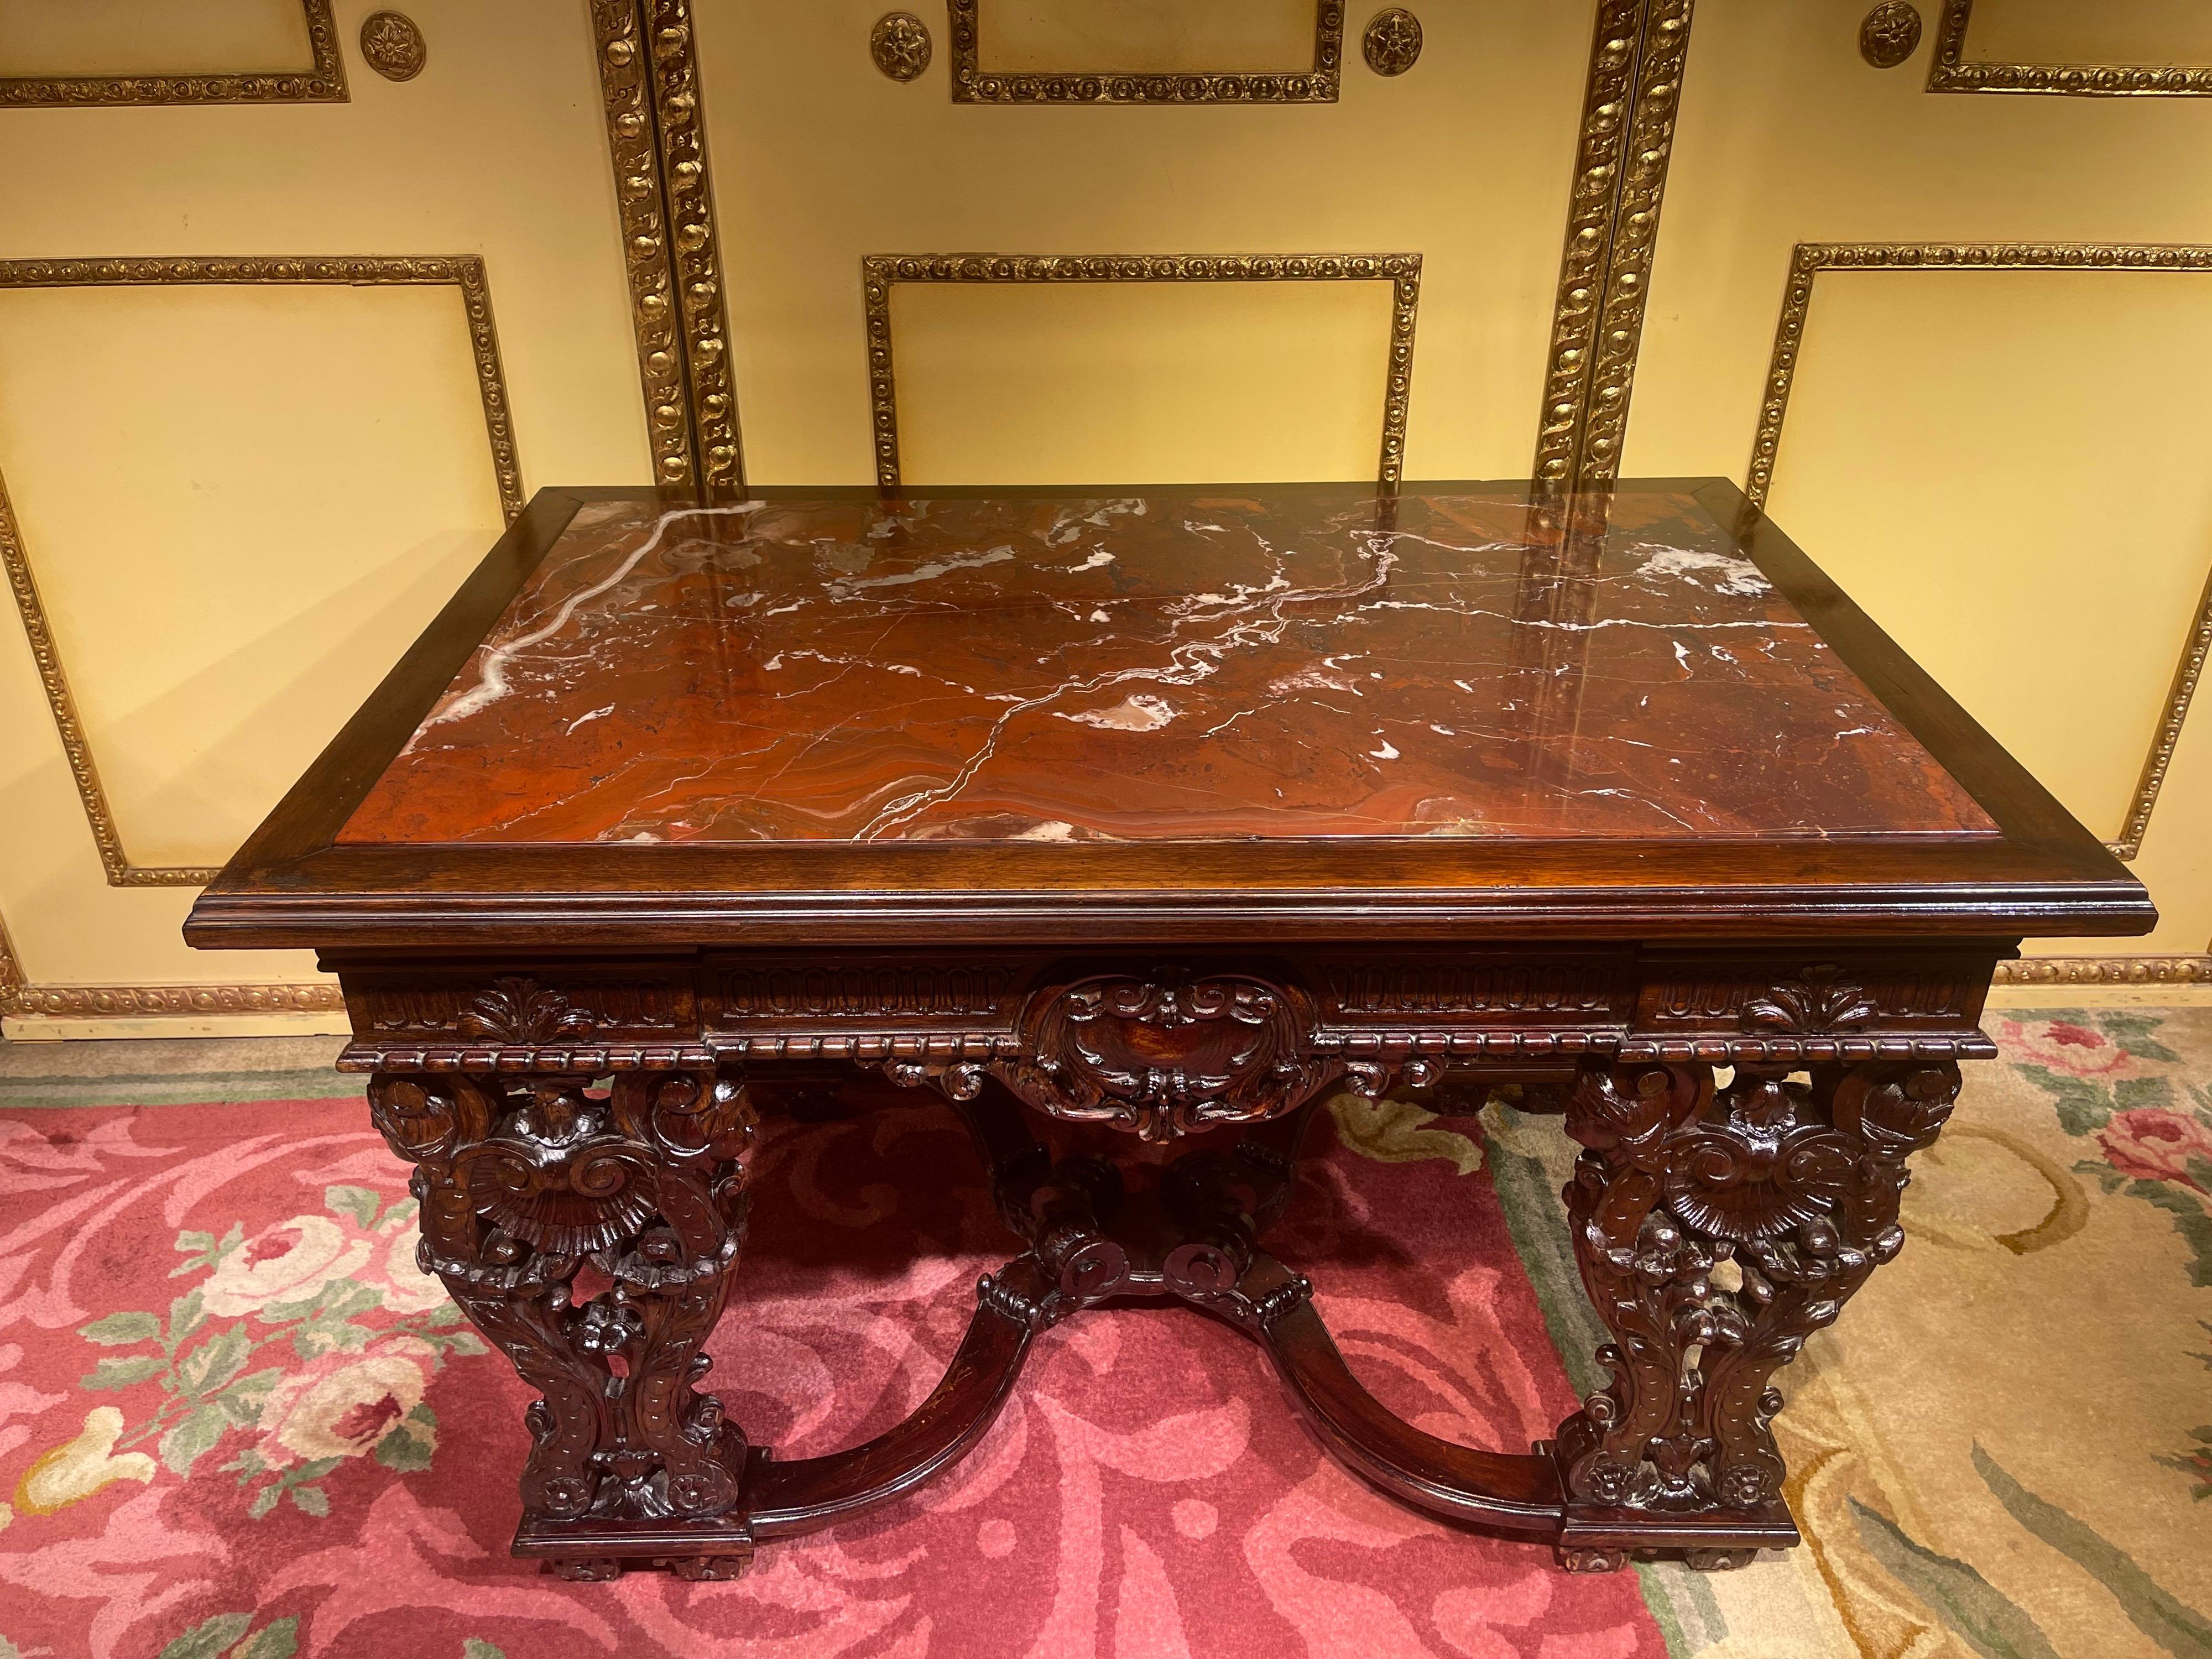 Stately historicism salon table, solid oak, around 1880

Very richly carved base. Legs connected with X-shaped footbridge. Inserted mottled marble top plate. Overall a very impressive centerpiece. Germany, solid oak, hand-carved from the